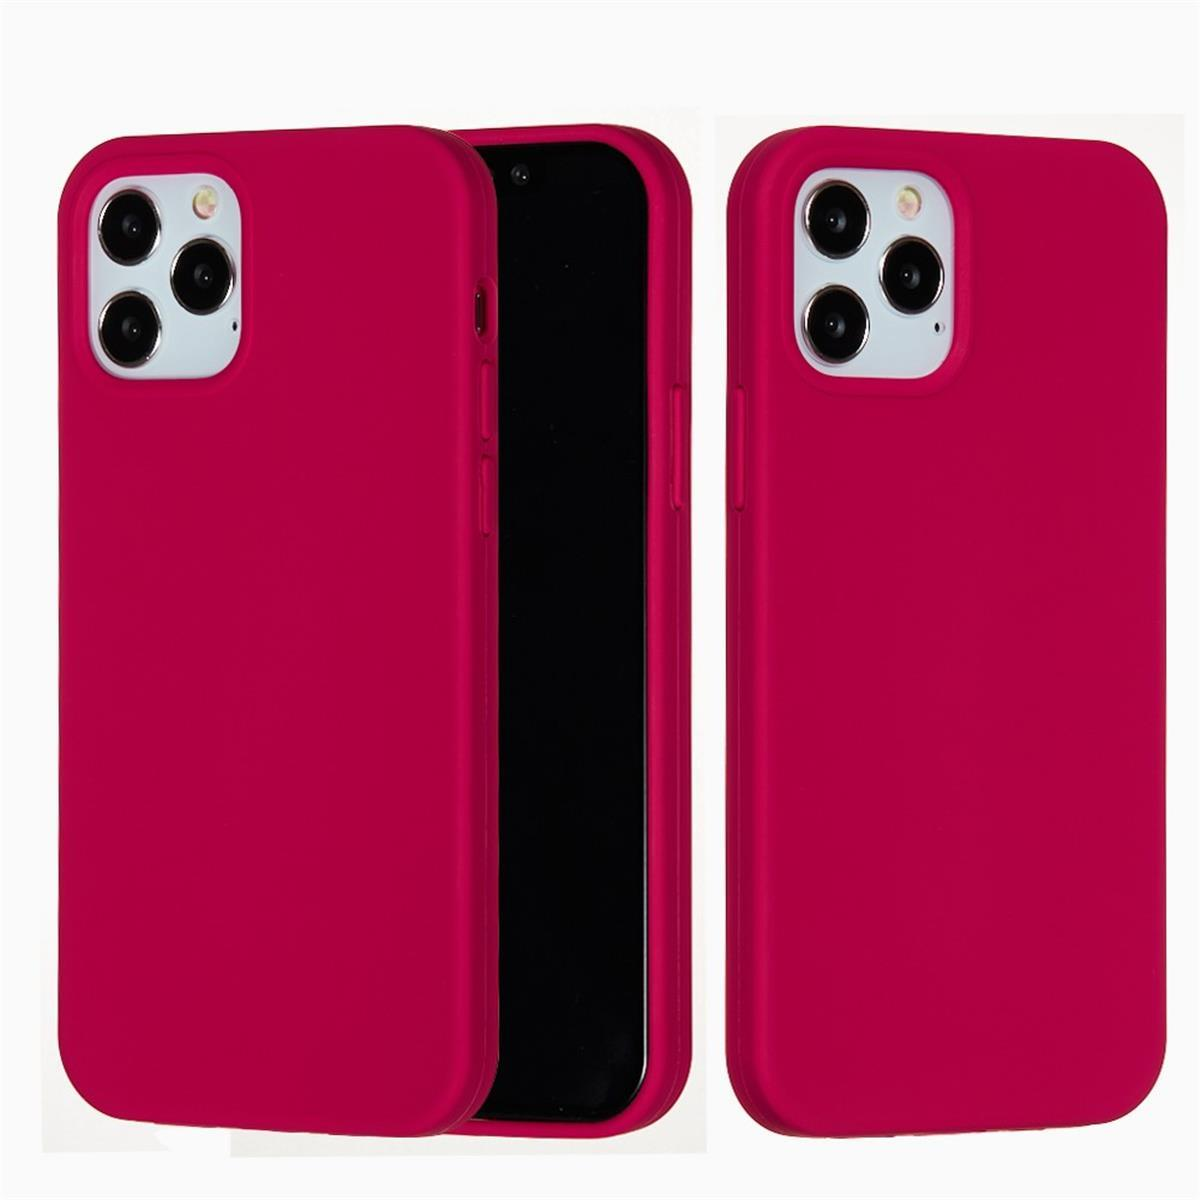 Apple, iPhone Pro Max Handycase Zoll], aus Silikon, Backcover, 13 COVERKINGZ Rot [6,7